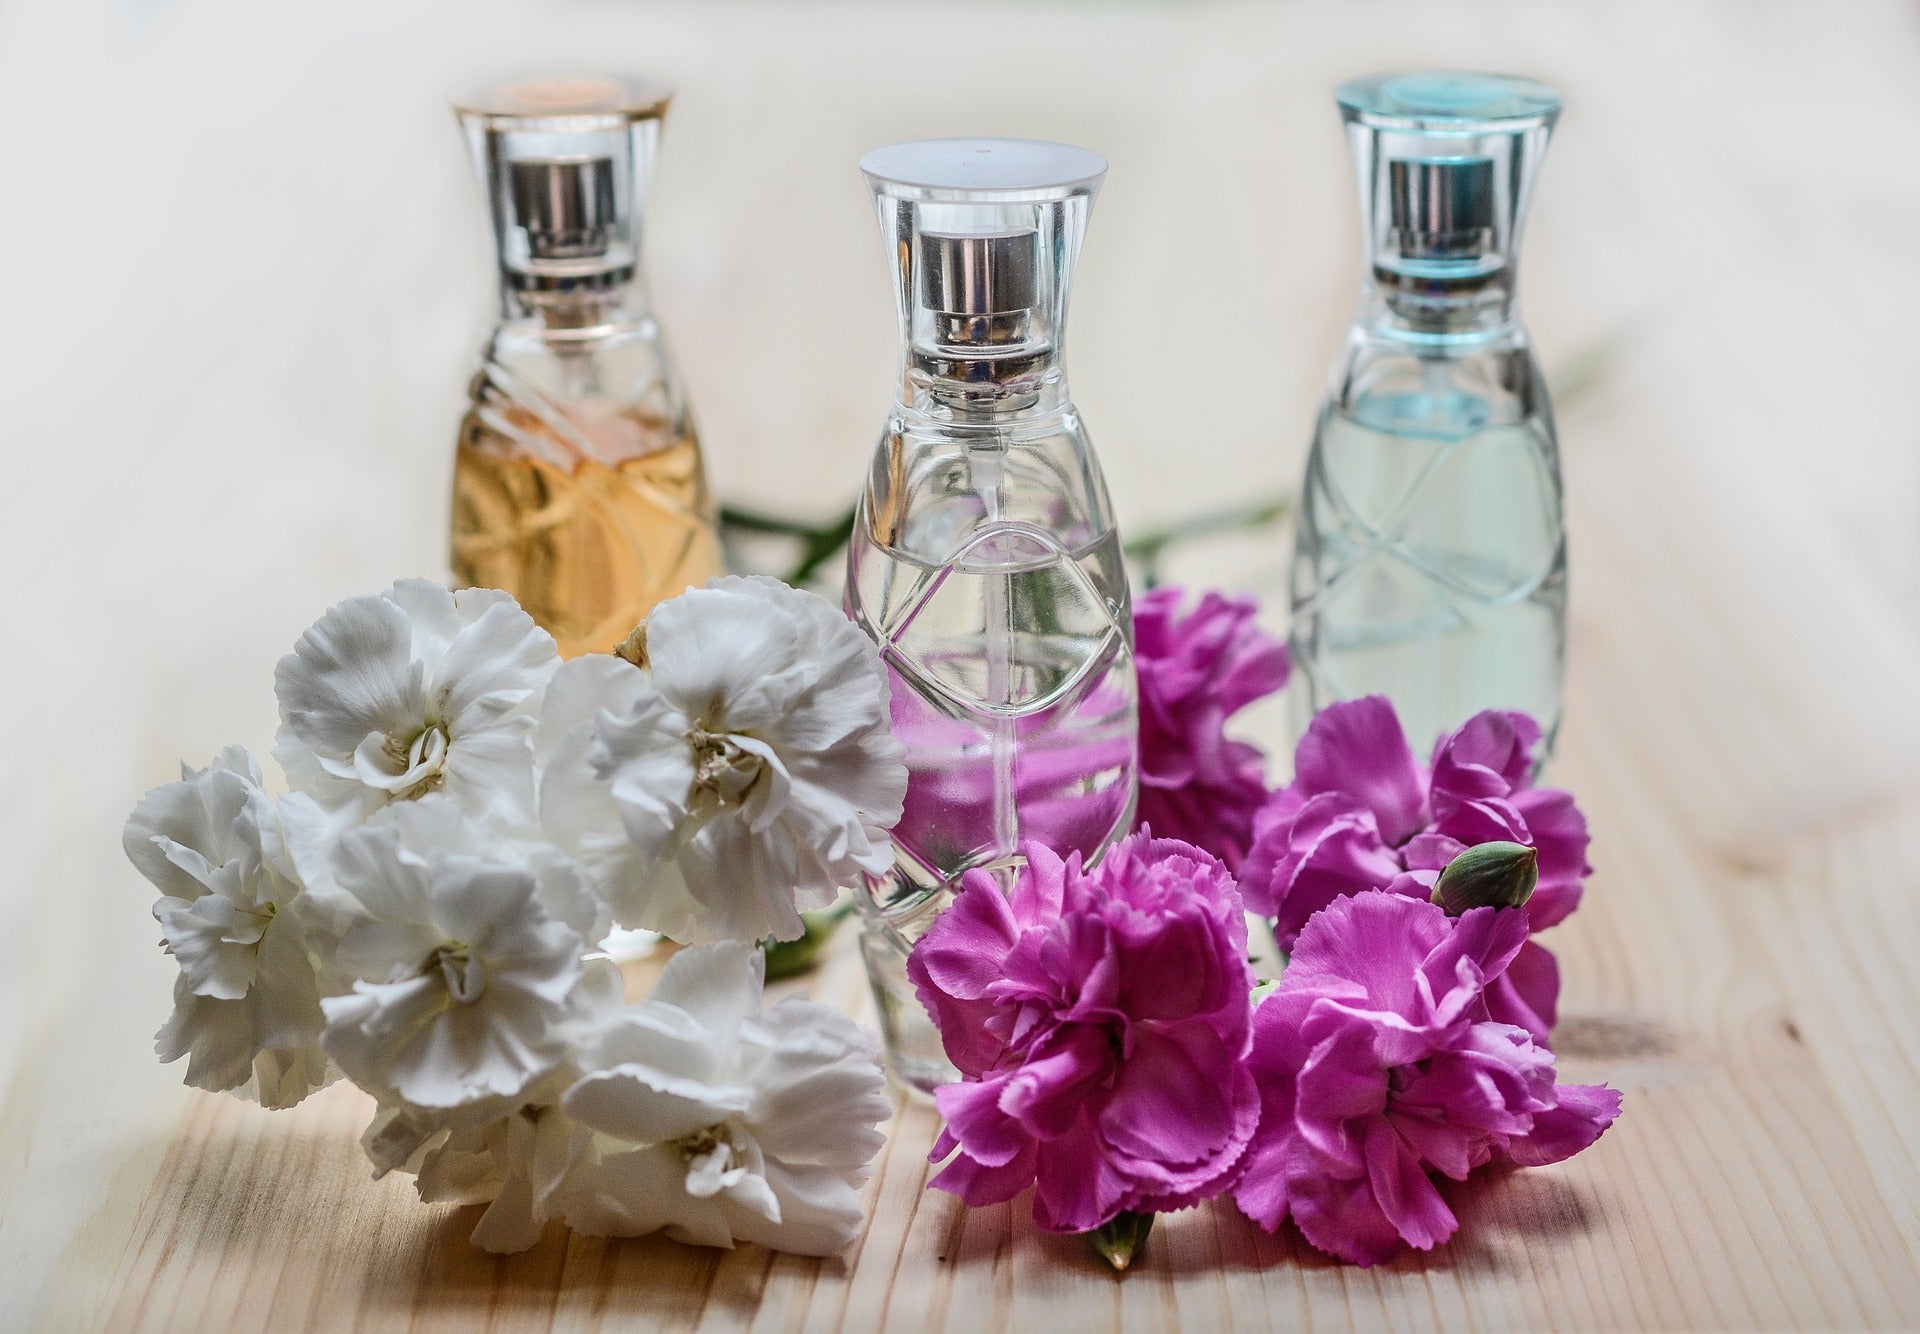 DIY Homemade Hydrating Face Mist - A Simple How To from Circcell